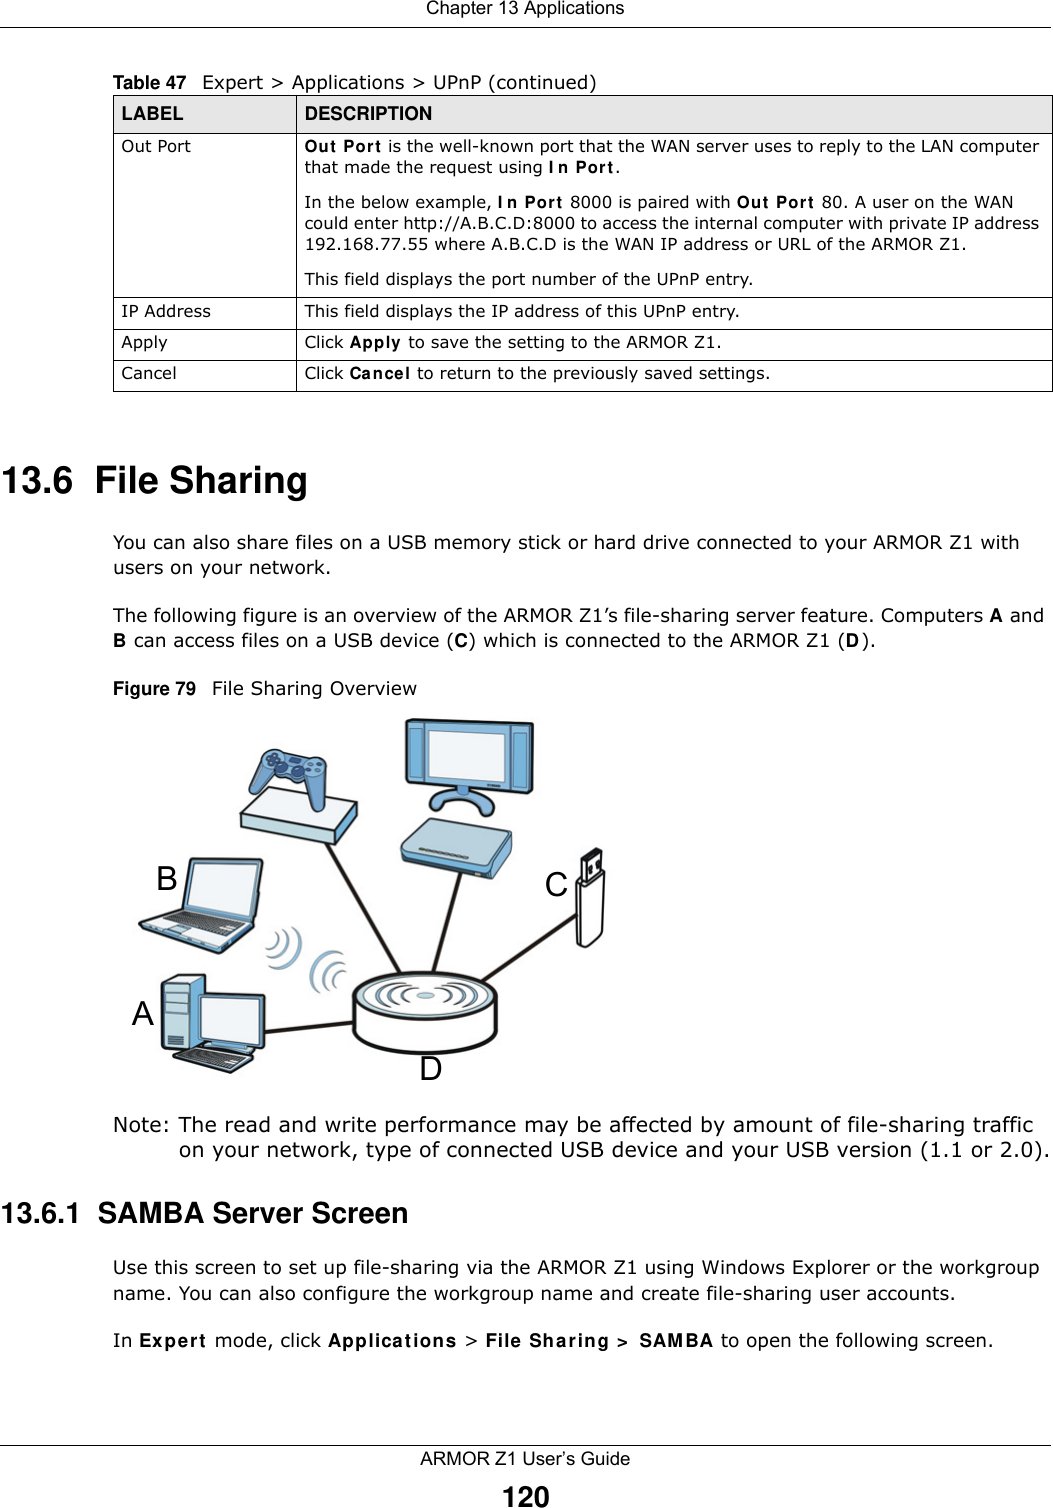 Chapter 13 ApplicationsARMOR Z1 User’s Guide12013.6  File SharingYou can also share files on a USB memory stick or hard drive connected to your ARMOR Z1 with users on your network. The following figure is an overview of the ARMOR Z1’s file-sharing server feature. Computers A and B can access files on a USB device (C) which is connected to the ARMOR Z1 (D).Figure 79   File Sharing OverviewNote: The read and write performance may be affected by amount of file-sharing traffic on your network, type of connected USB device and your USB version (1.1 or 2.0).13.6.1  SAMBA Server ScreenUse this screen to set up file-sharing via the ARMOR Z1 using Windows Explorer or the workgroup name. You can also configure the workgroup name and create file-sharing user accounts. In Expert mode, click Applications &gt; File Sharing &gt; SAMBA to open the following screen.Out Port Out Port is the well-known port that the WAN server uses to reply to the LAN computer that made the request using In Port.In the below example, In Port 8000 is paired with Out Port 80. A user on the WAN could enter http://A.B.C.D:8000 to access the internal computer with private IP address 192.168.77.55 where A.B.C.D is the WAN IP address or URL of the ARMOR Z1.This field displays the port number of the UPnP entry.IP Address This field displays the IP address of this UPnP entry.Apply Click Apply to save the setting to the ARMOR Z1.Cancel Click Cancel to return to the previously saved settings.Table 47   Expert &gt; Applications &gt; UPnP (continued)LABEL DESCRIPTIONABCD